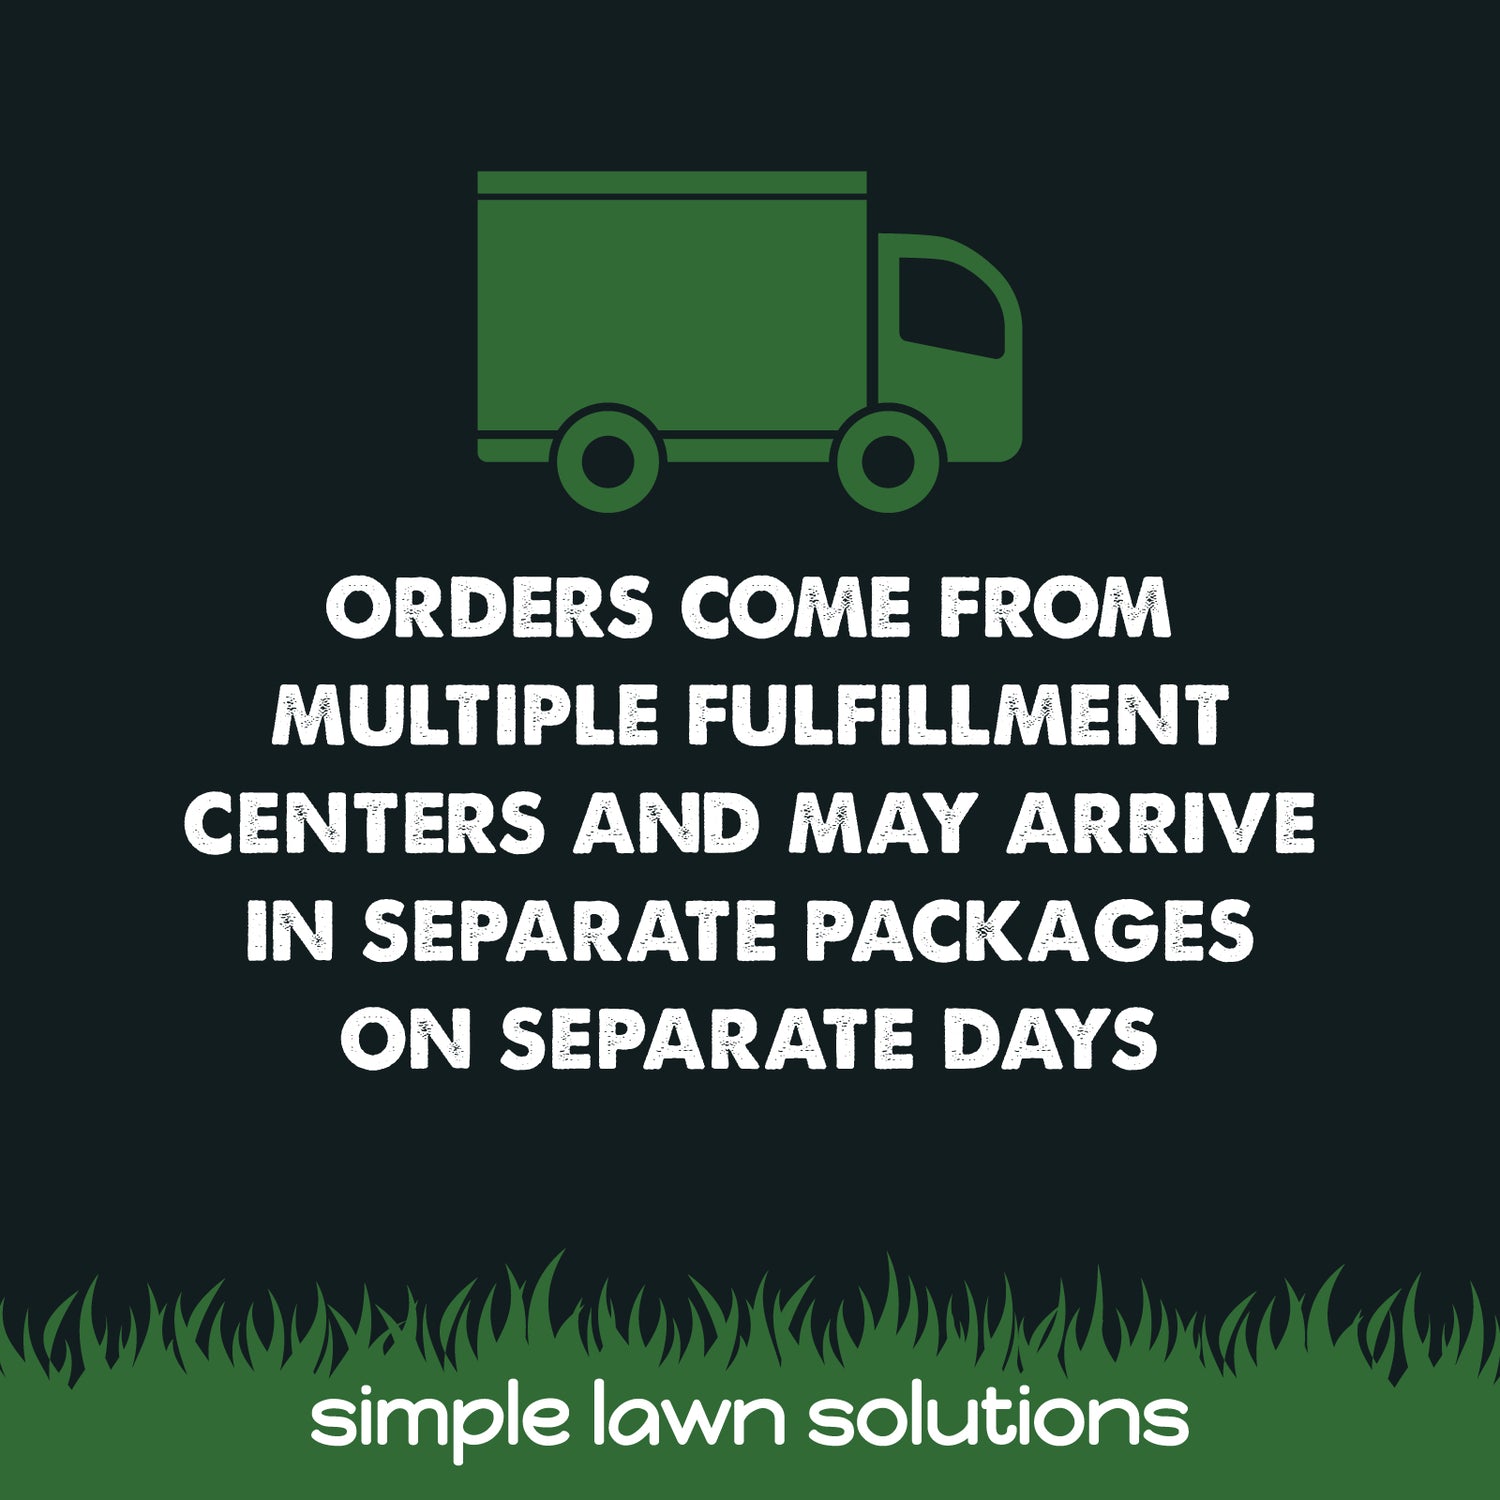 Orders come from multiple fulfillment centers and may arrive in separate packages on separate days, simple lawn solutions